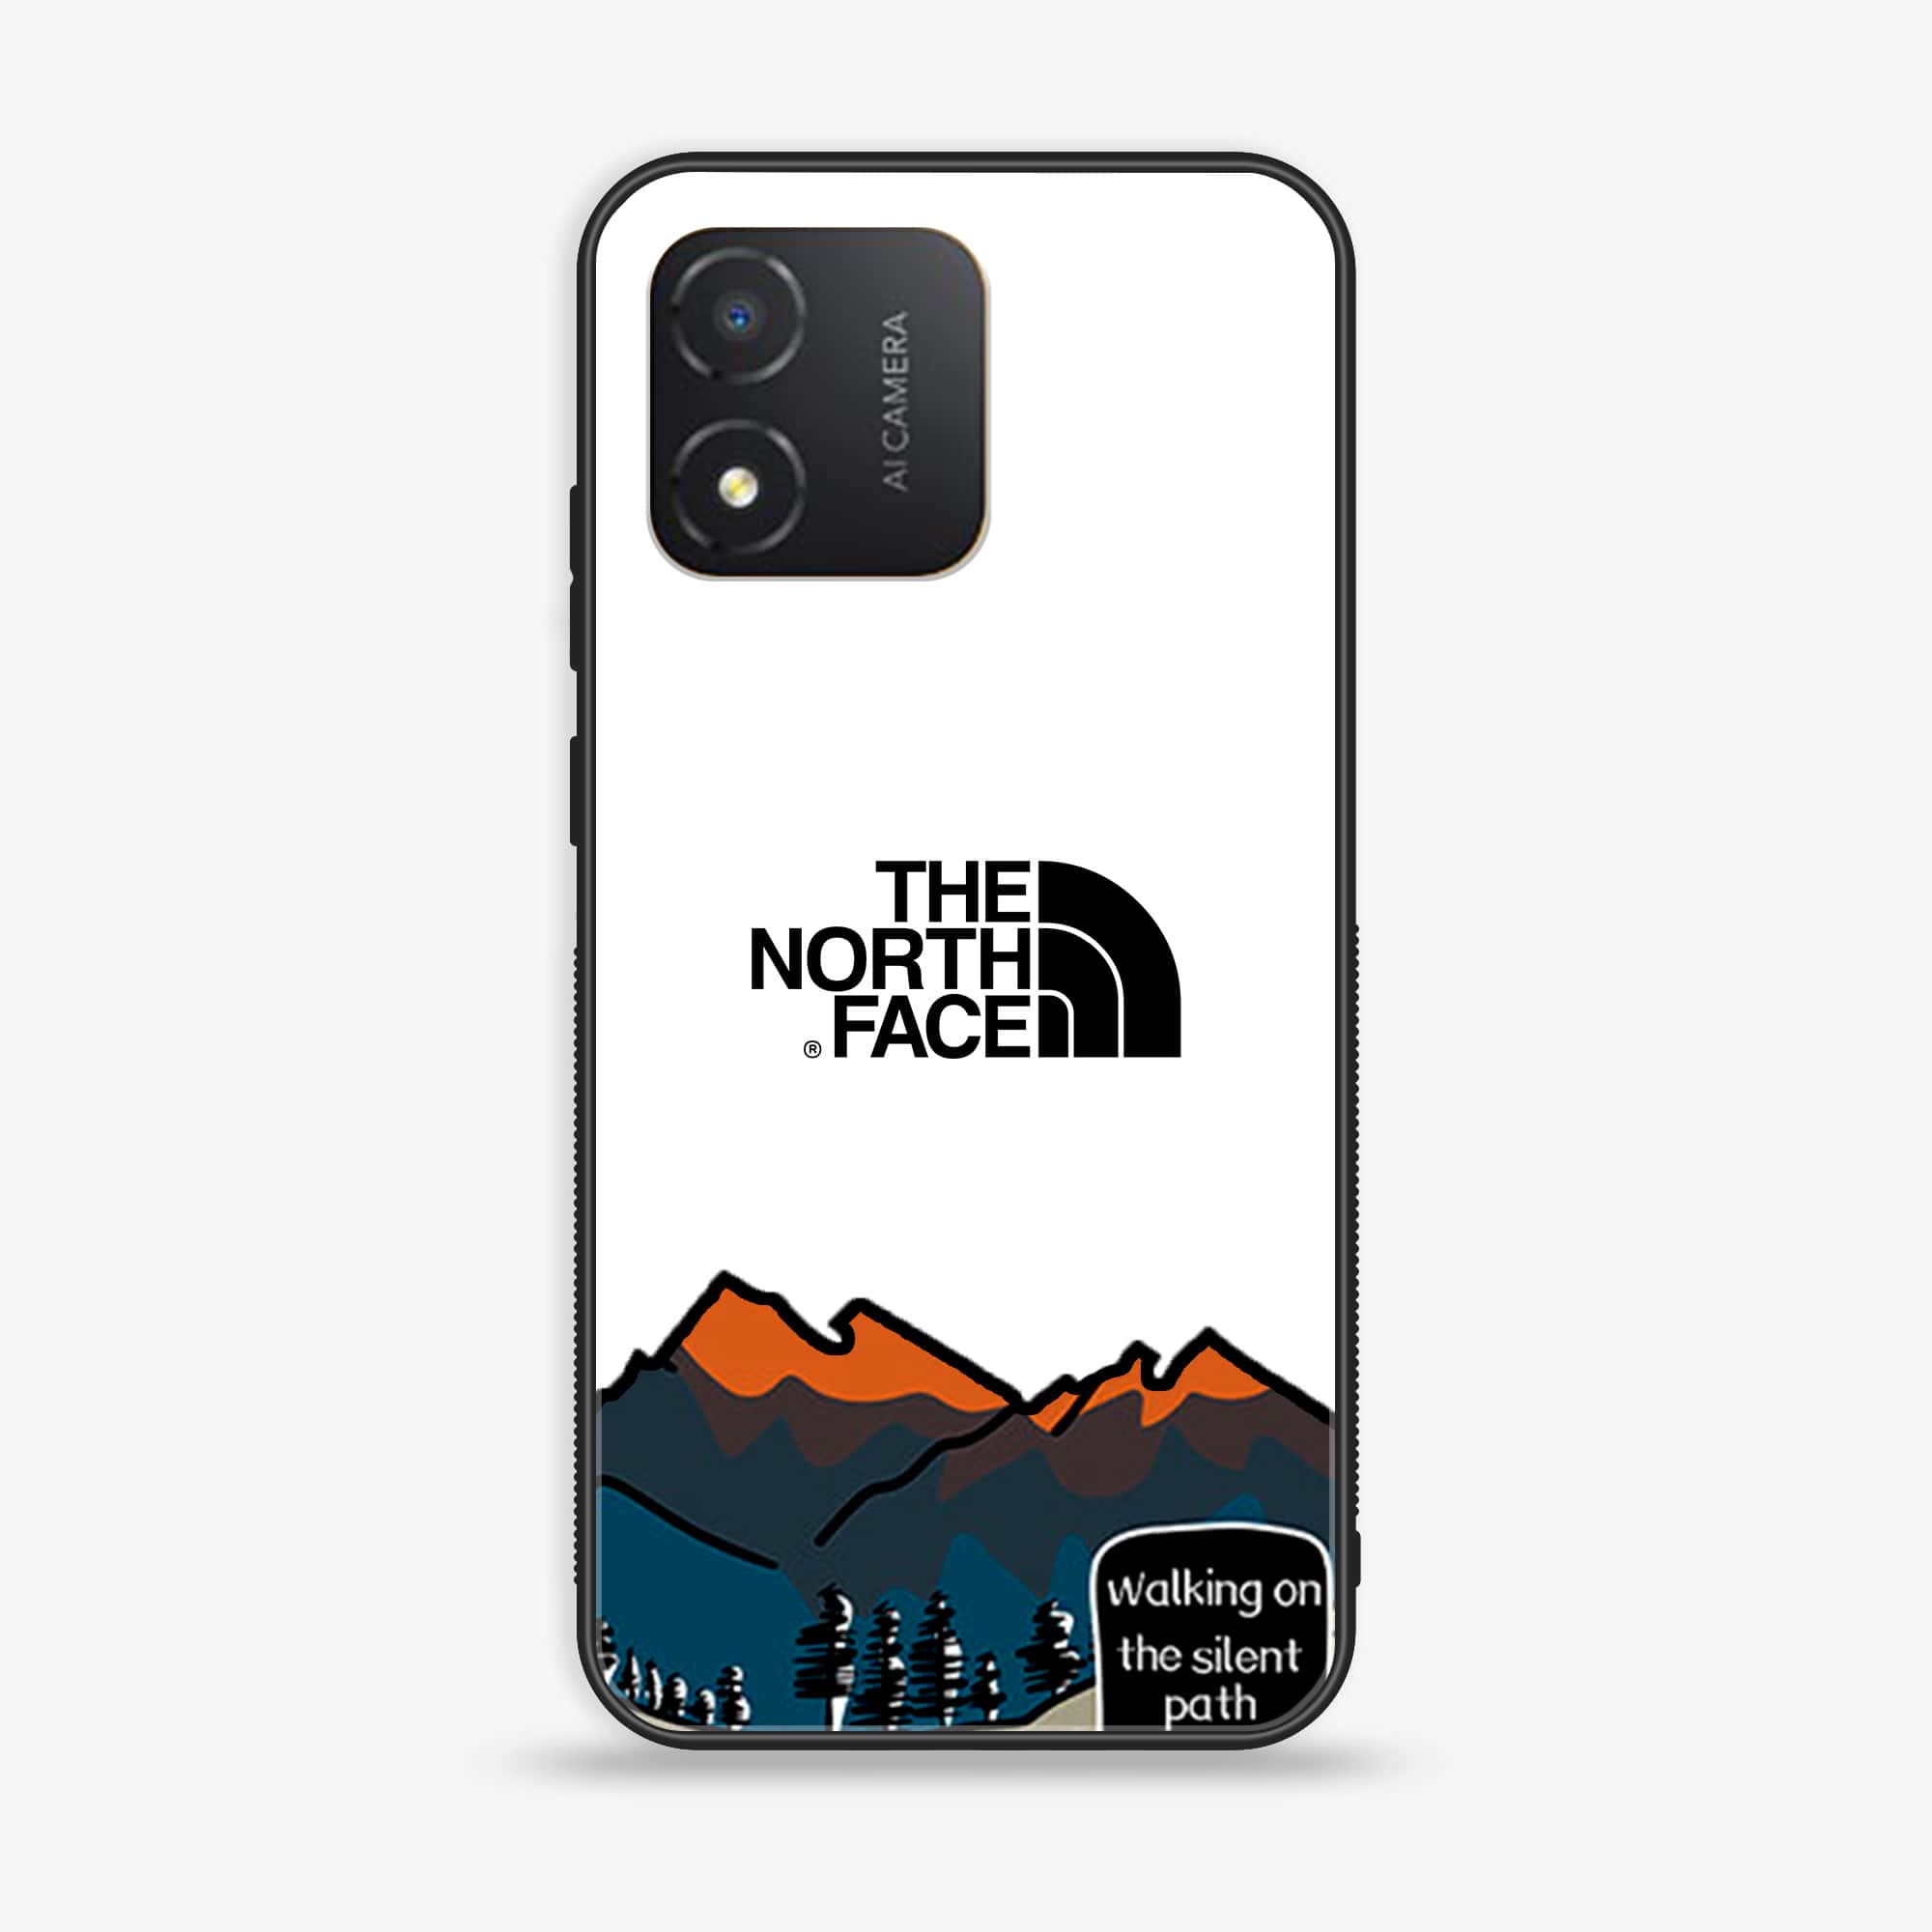 Honor X5 - The North Face Series - Premium Printed Glass soft Bumper shock Proof Case